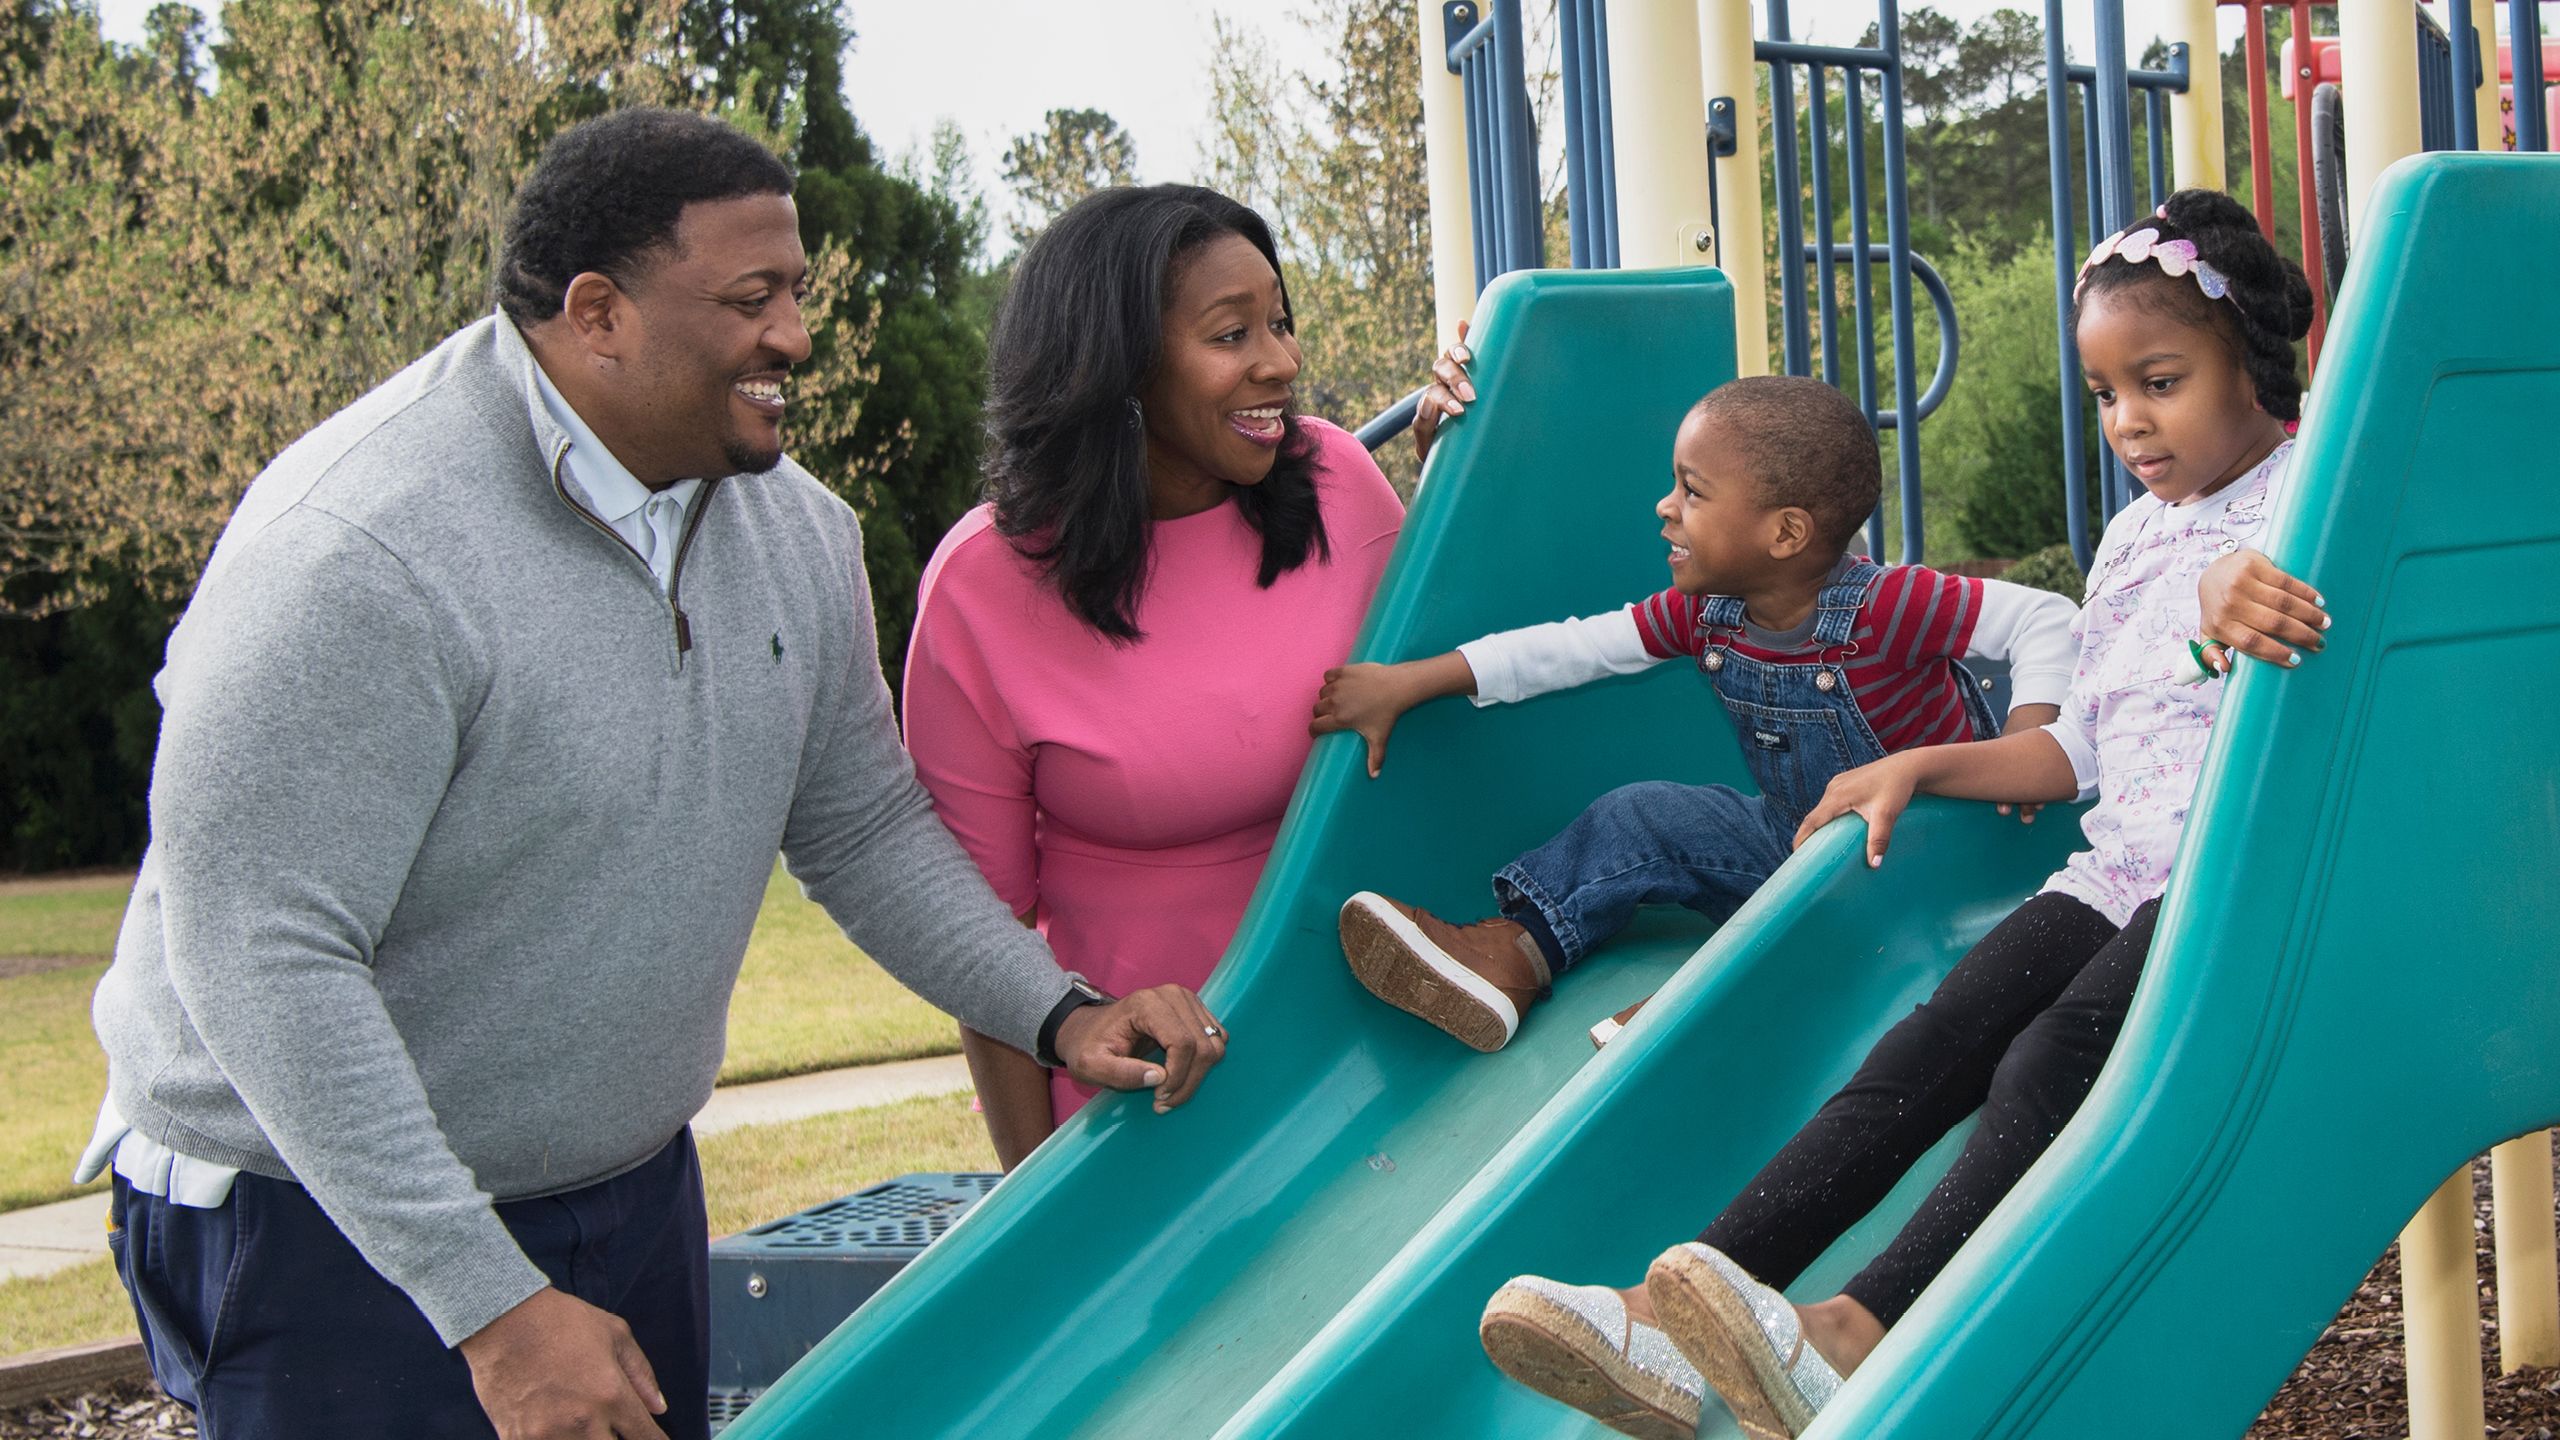 A photograph of a family in a park, with a young boy on a slide, a slightly older girl beside him on another slide, and their mom and dad smiling and standing beside them watching them. 